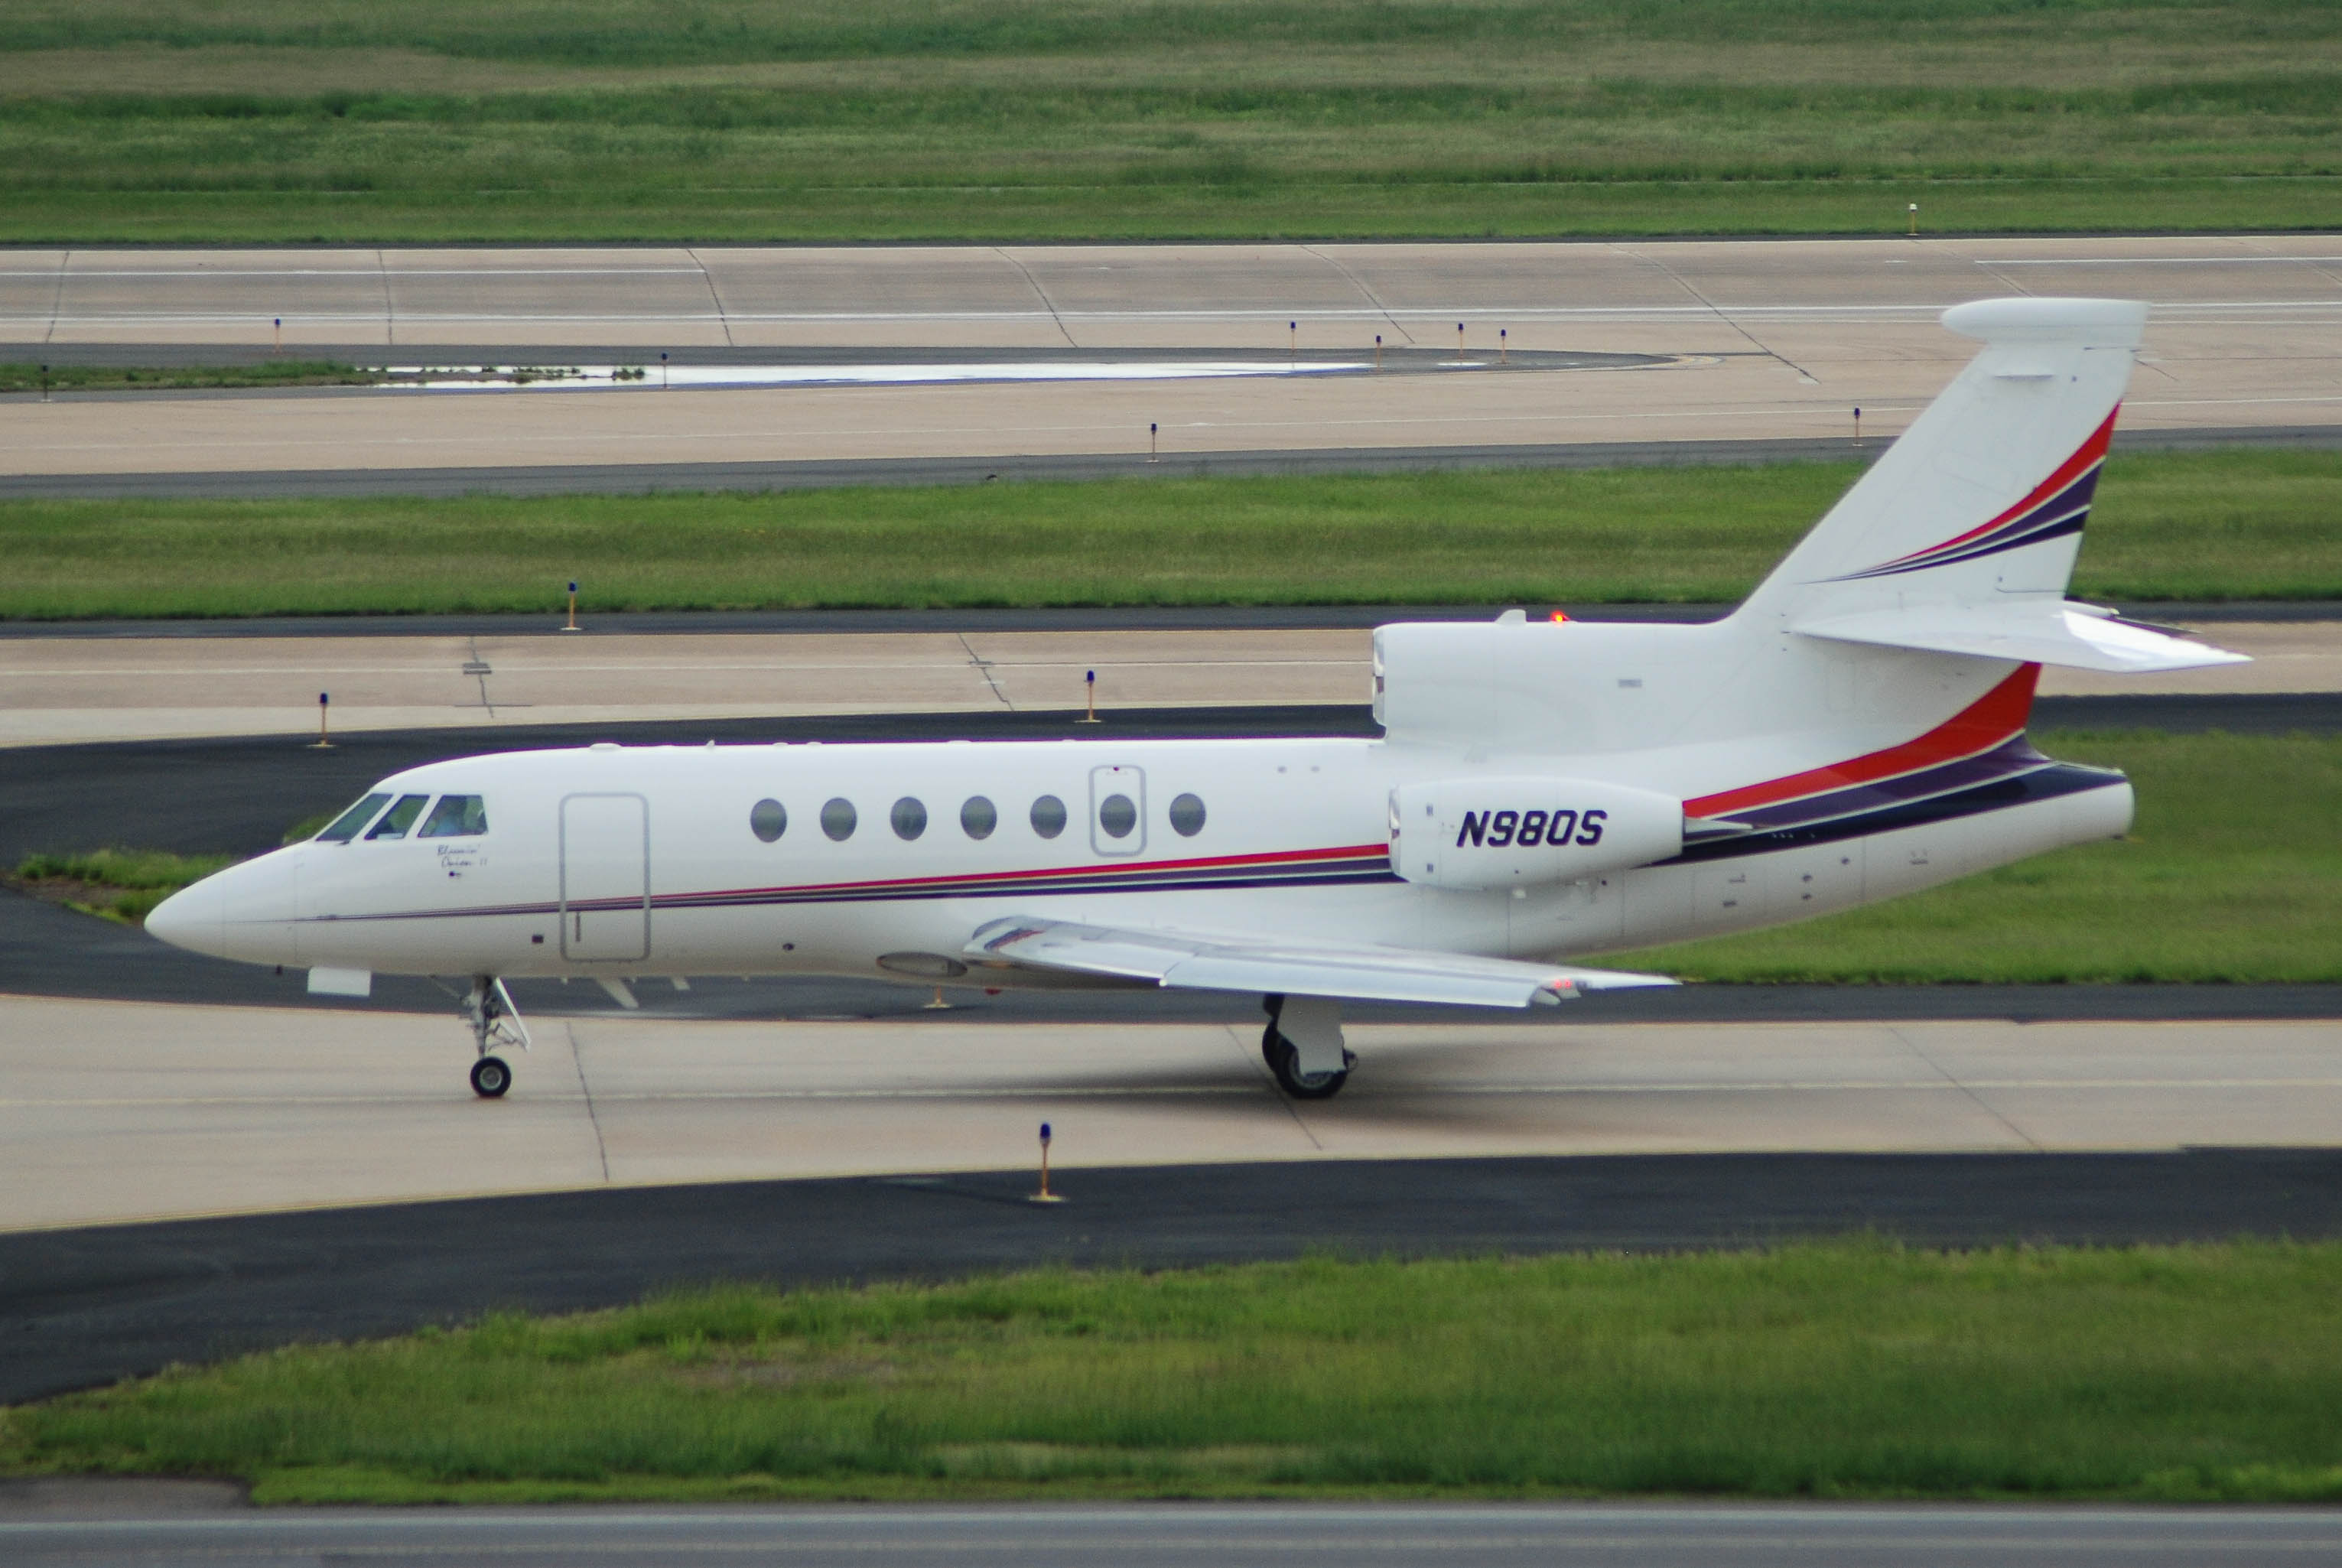 N980S/N980S Corporate Dassault Falcon 50 Photo by colinw - AVSpotters.com